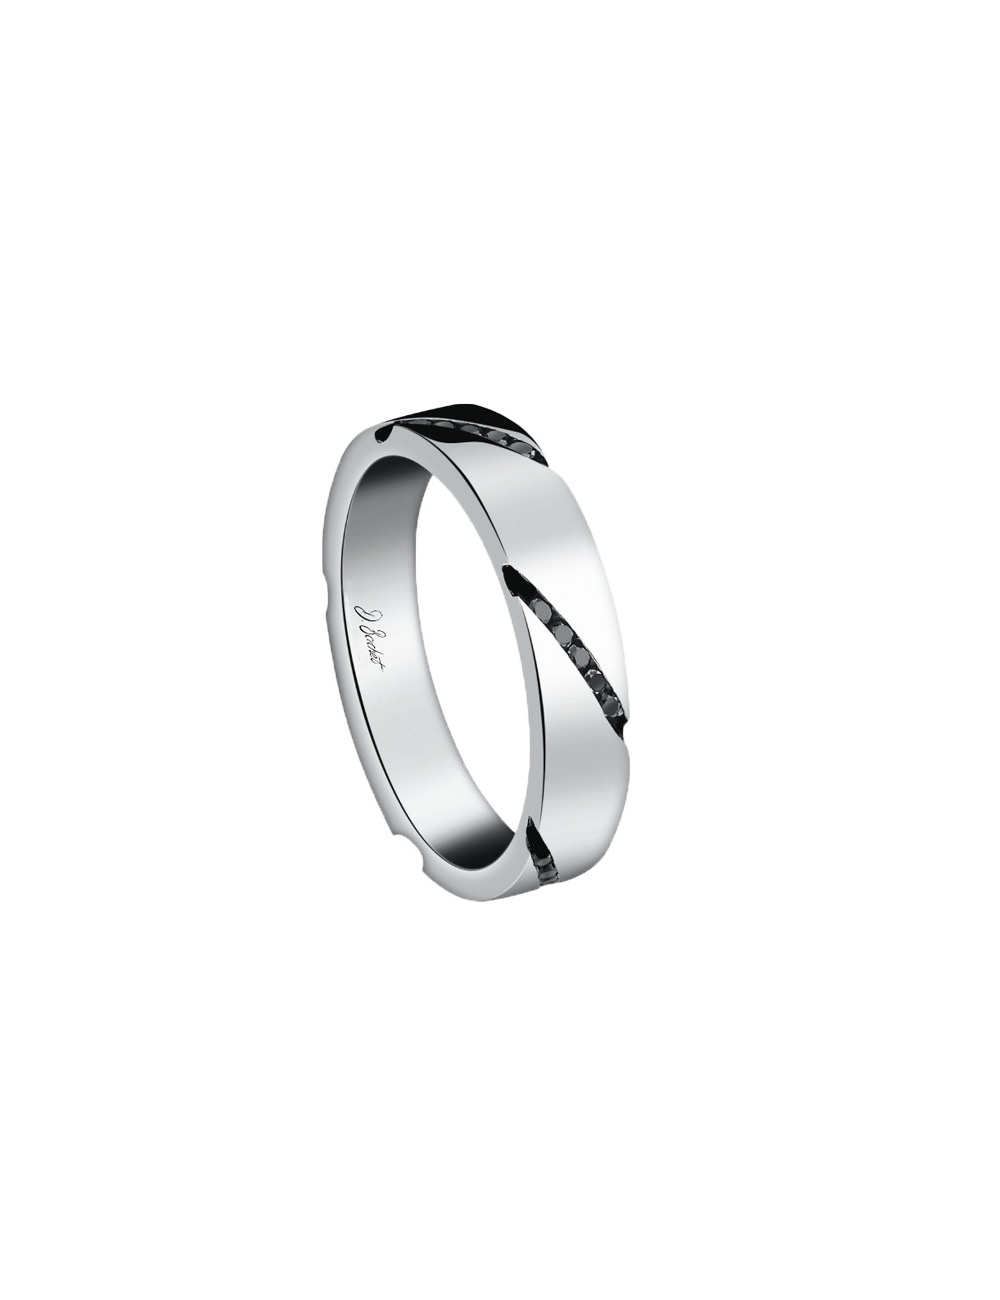 Men's platinum wedding band with a modern design, set with inclined rows of black diamonds.